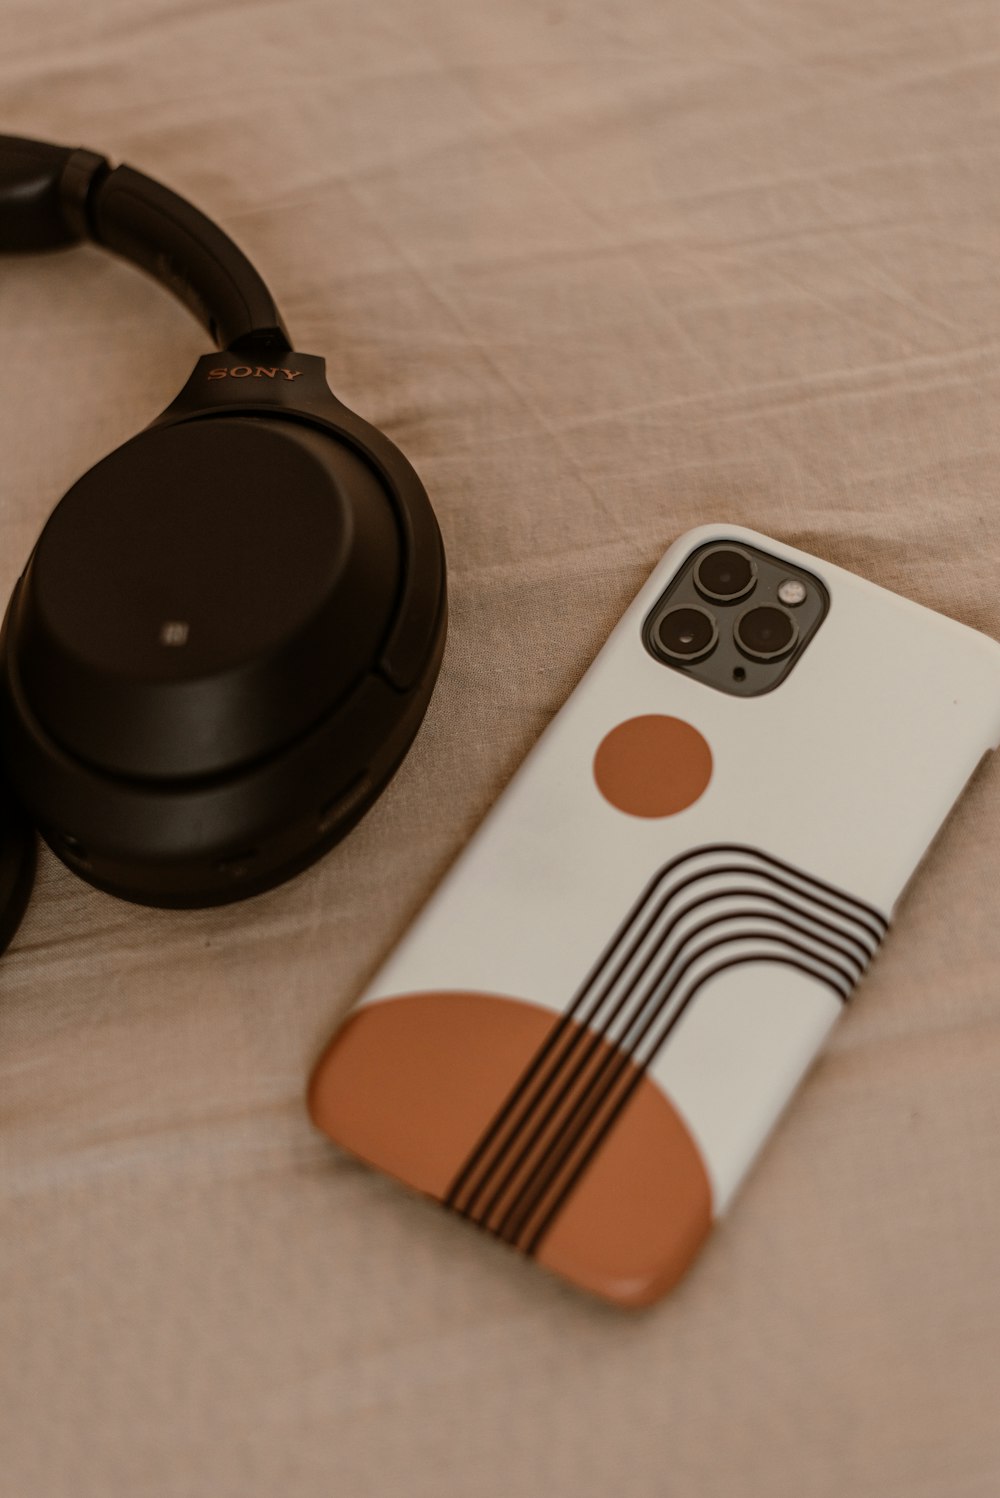 a pair of headphones sitting next to a phone case